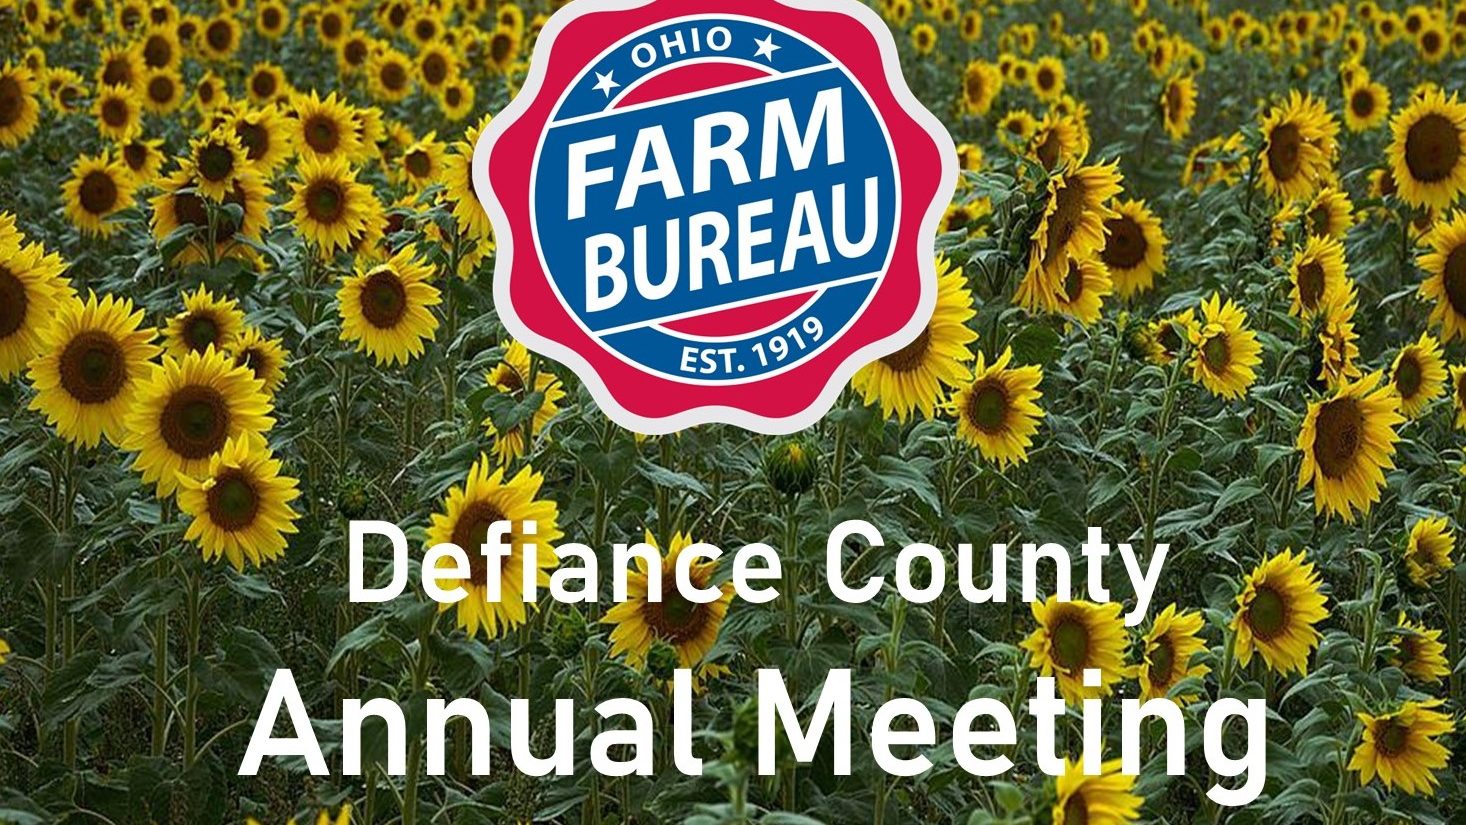 Defiance county Annual Meeting